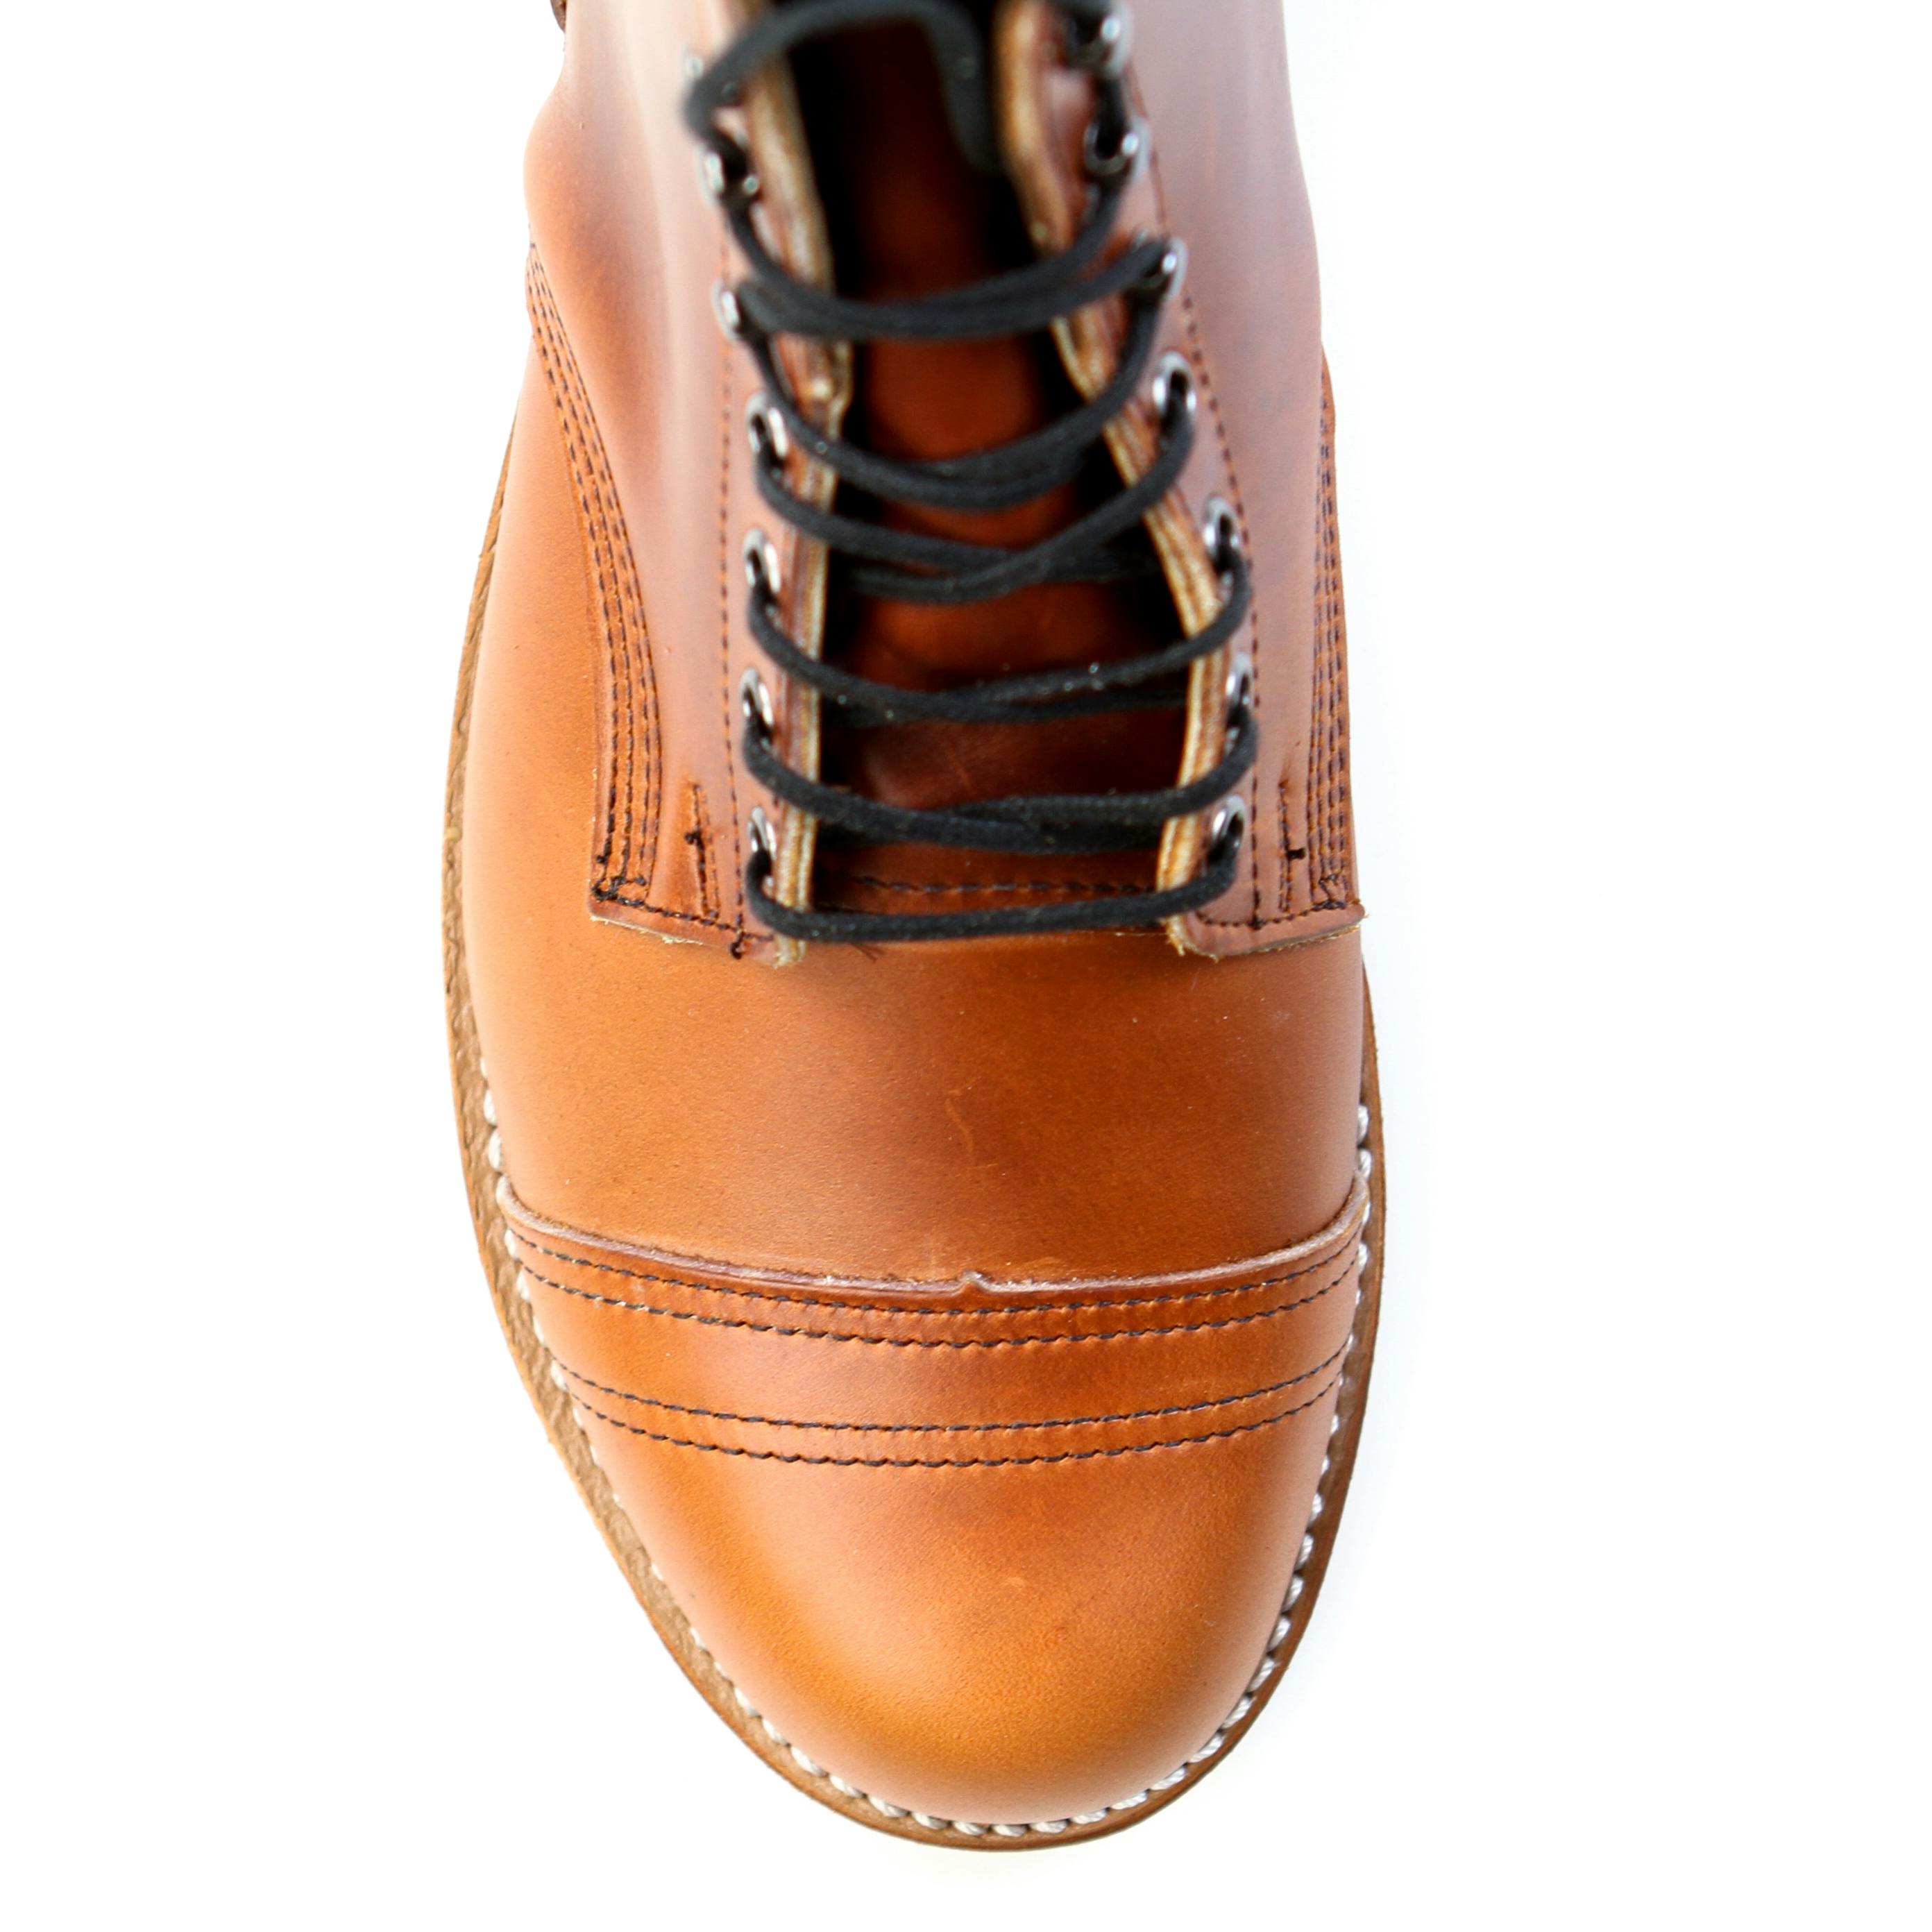 Thorogood Dodgeville (Leather Lined)